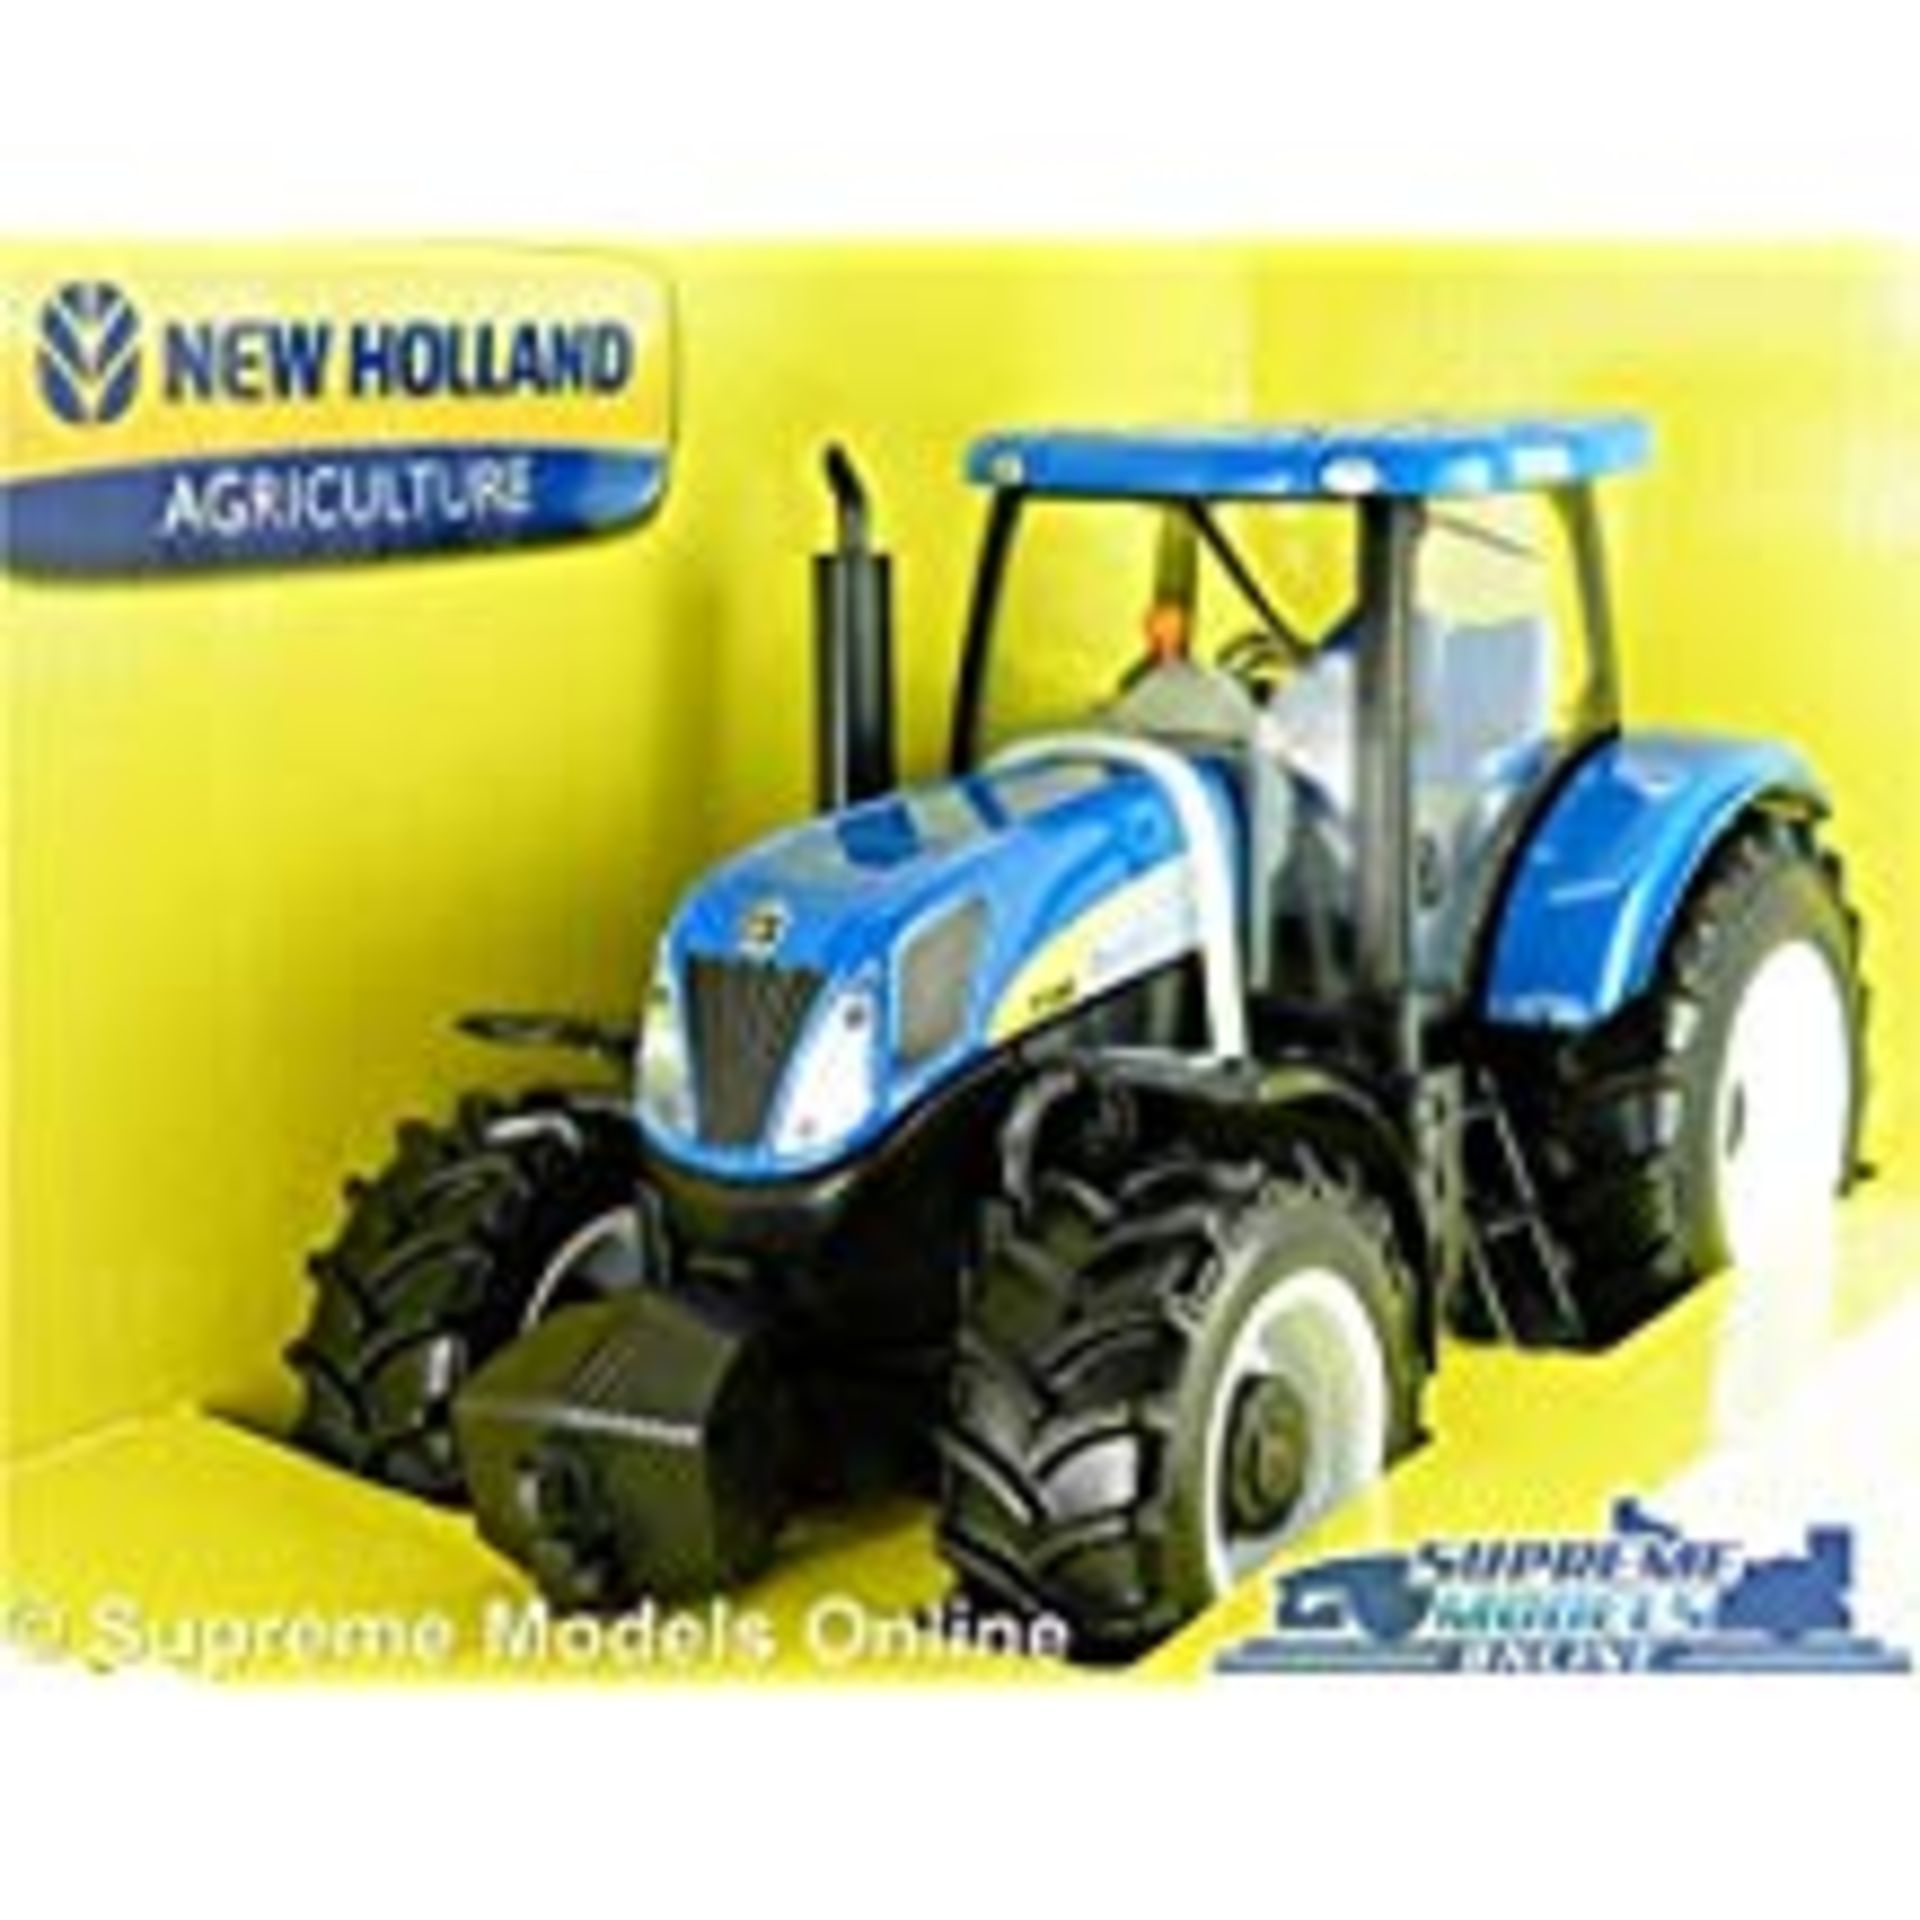 Four New Holland T7000 Agriculture Tractors - Image 2 of 2